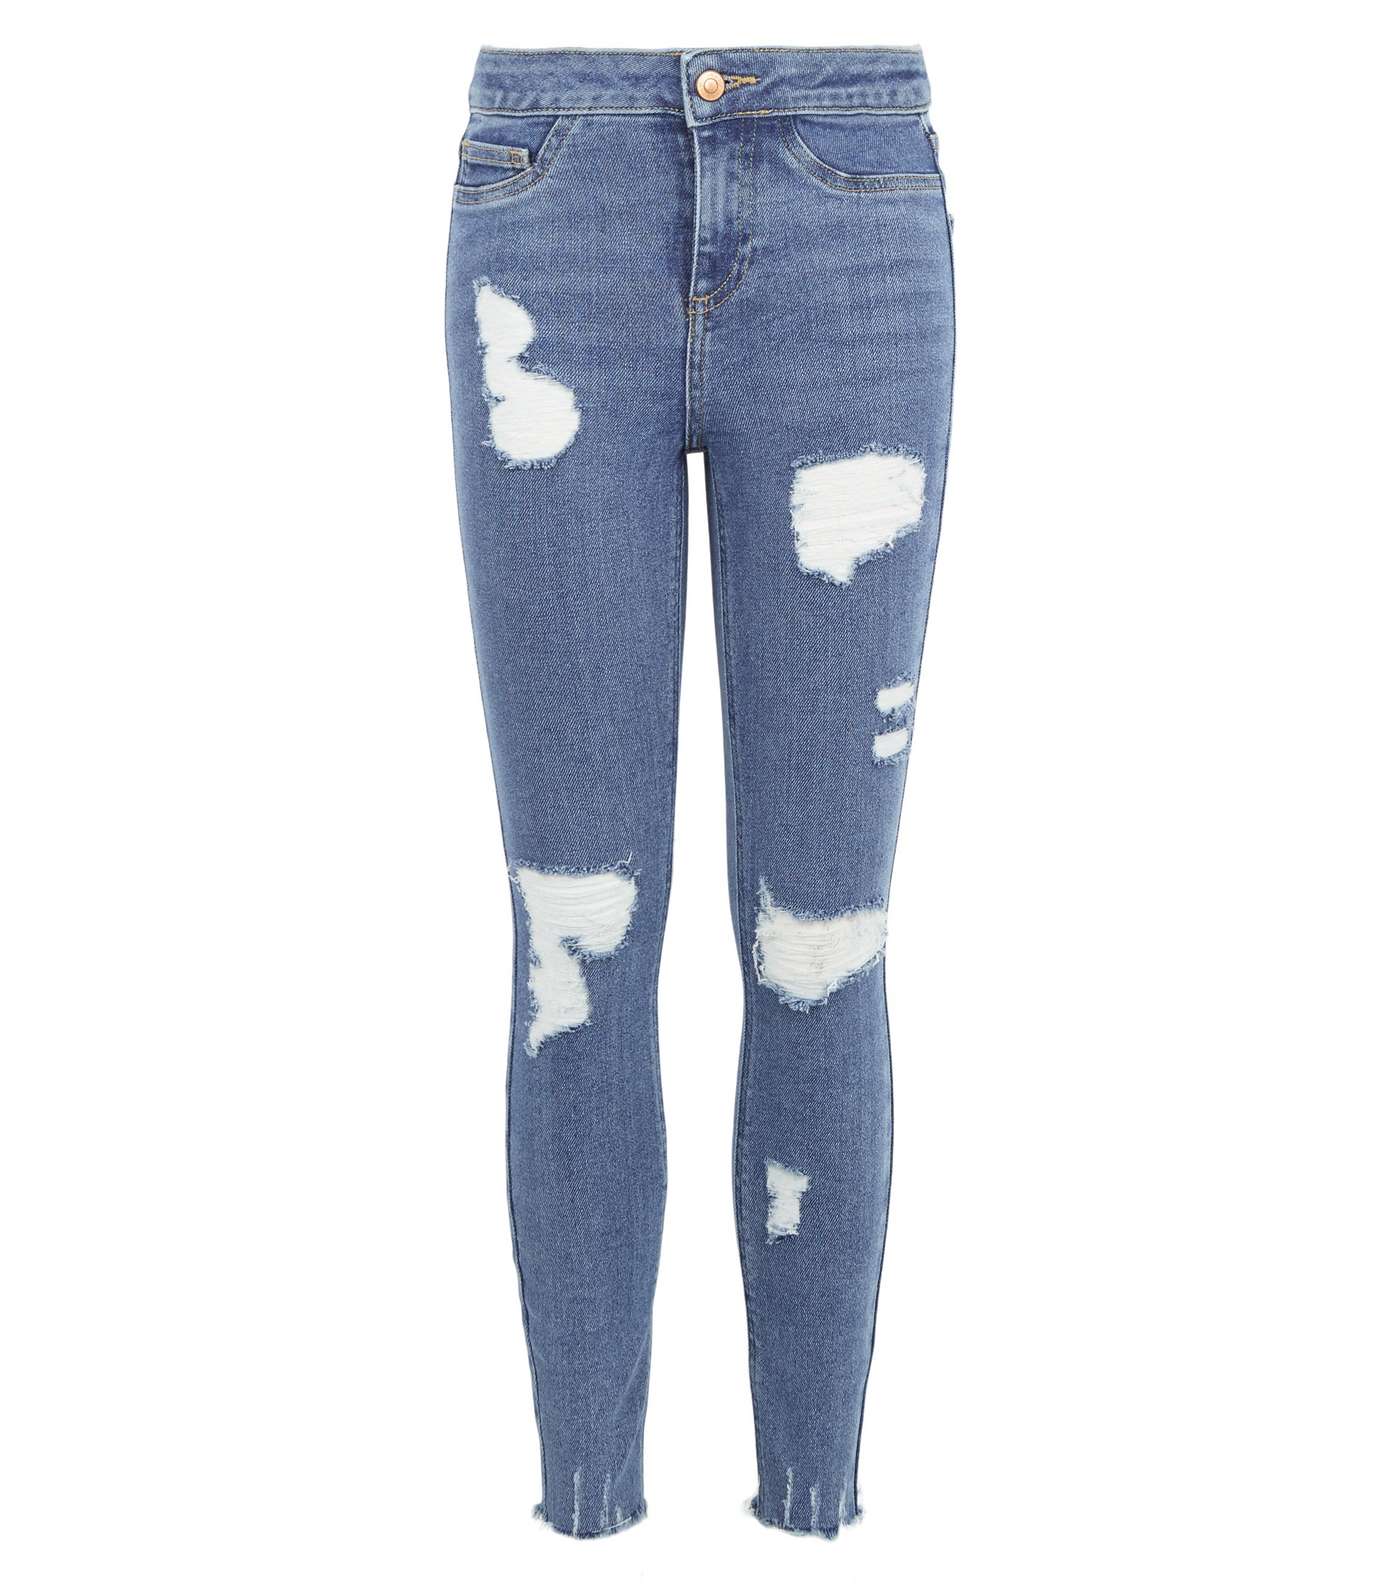 Girls Blue Ripped High Waist Super Skinny Jeans Image 4